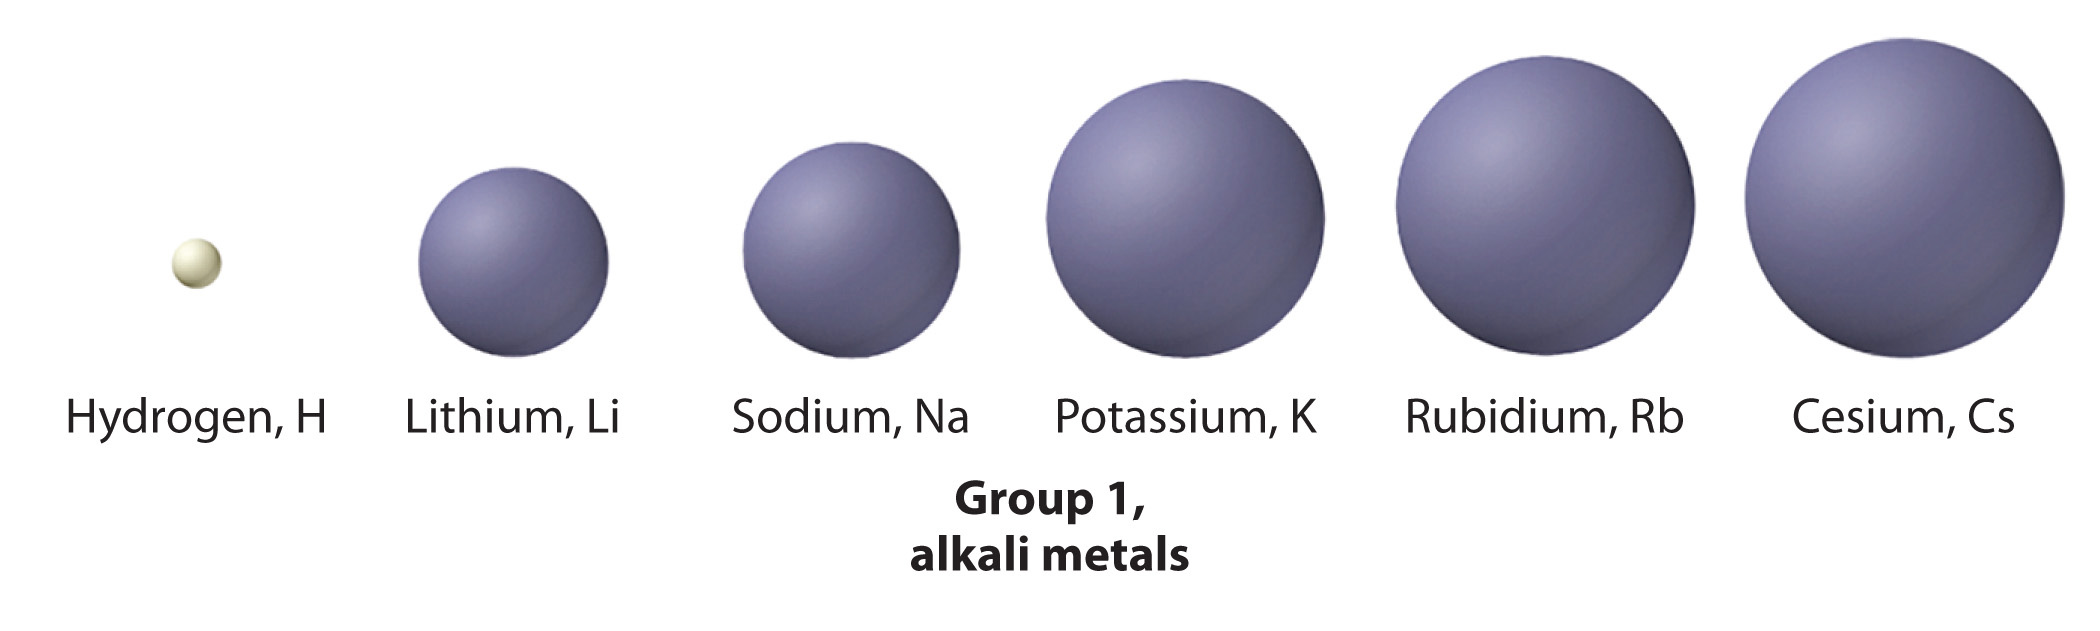 Compare And Contrast The Properties Of The Alkali Metals With The Properties Of The Halogen Family